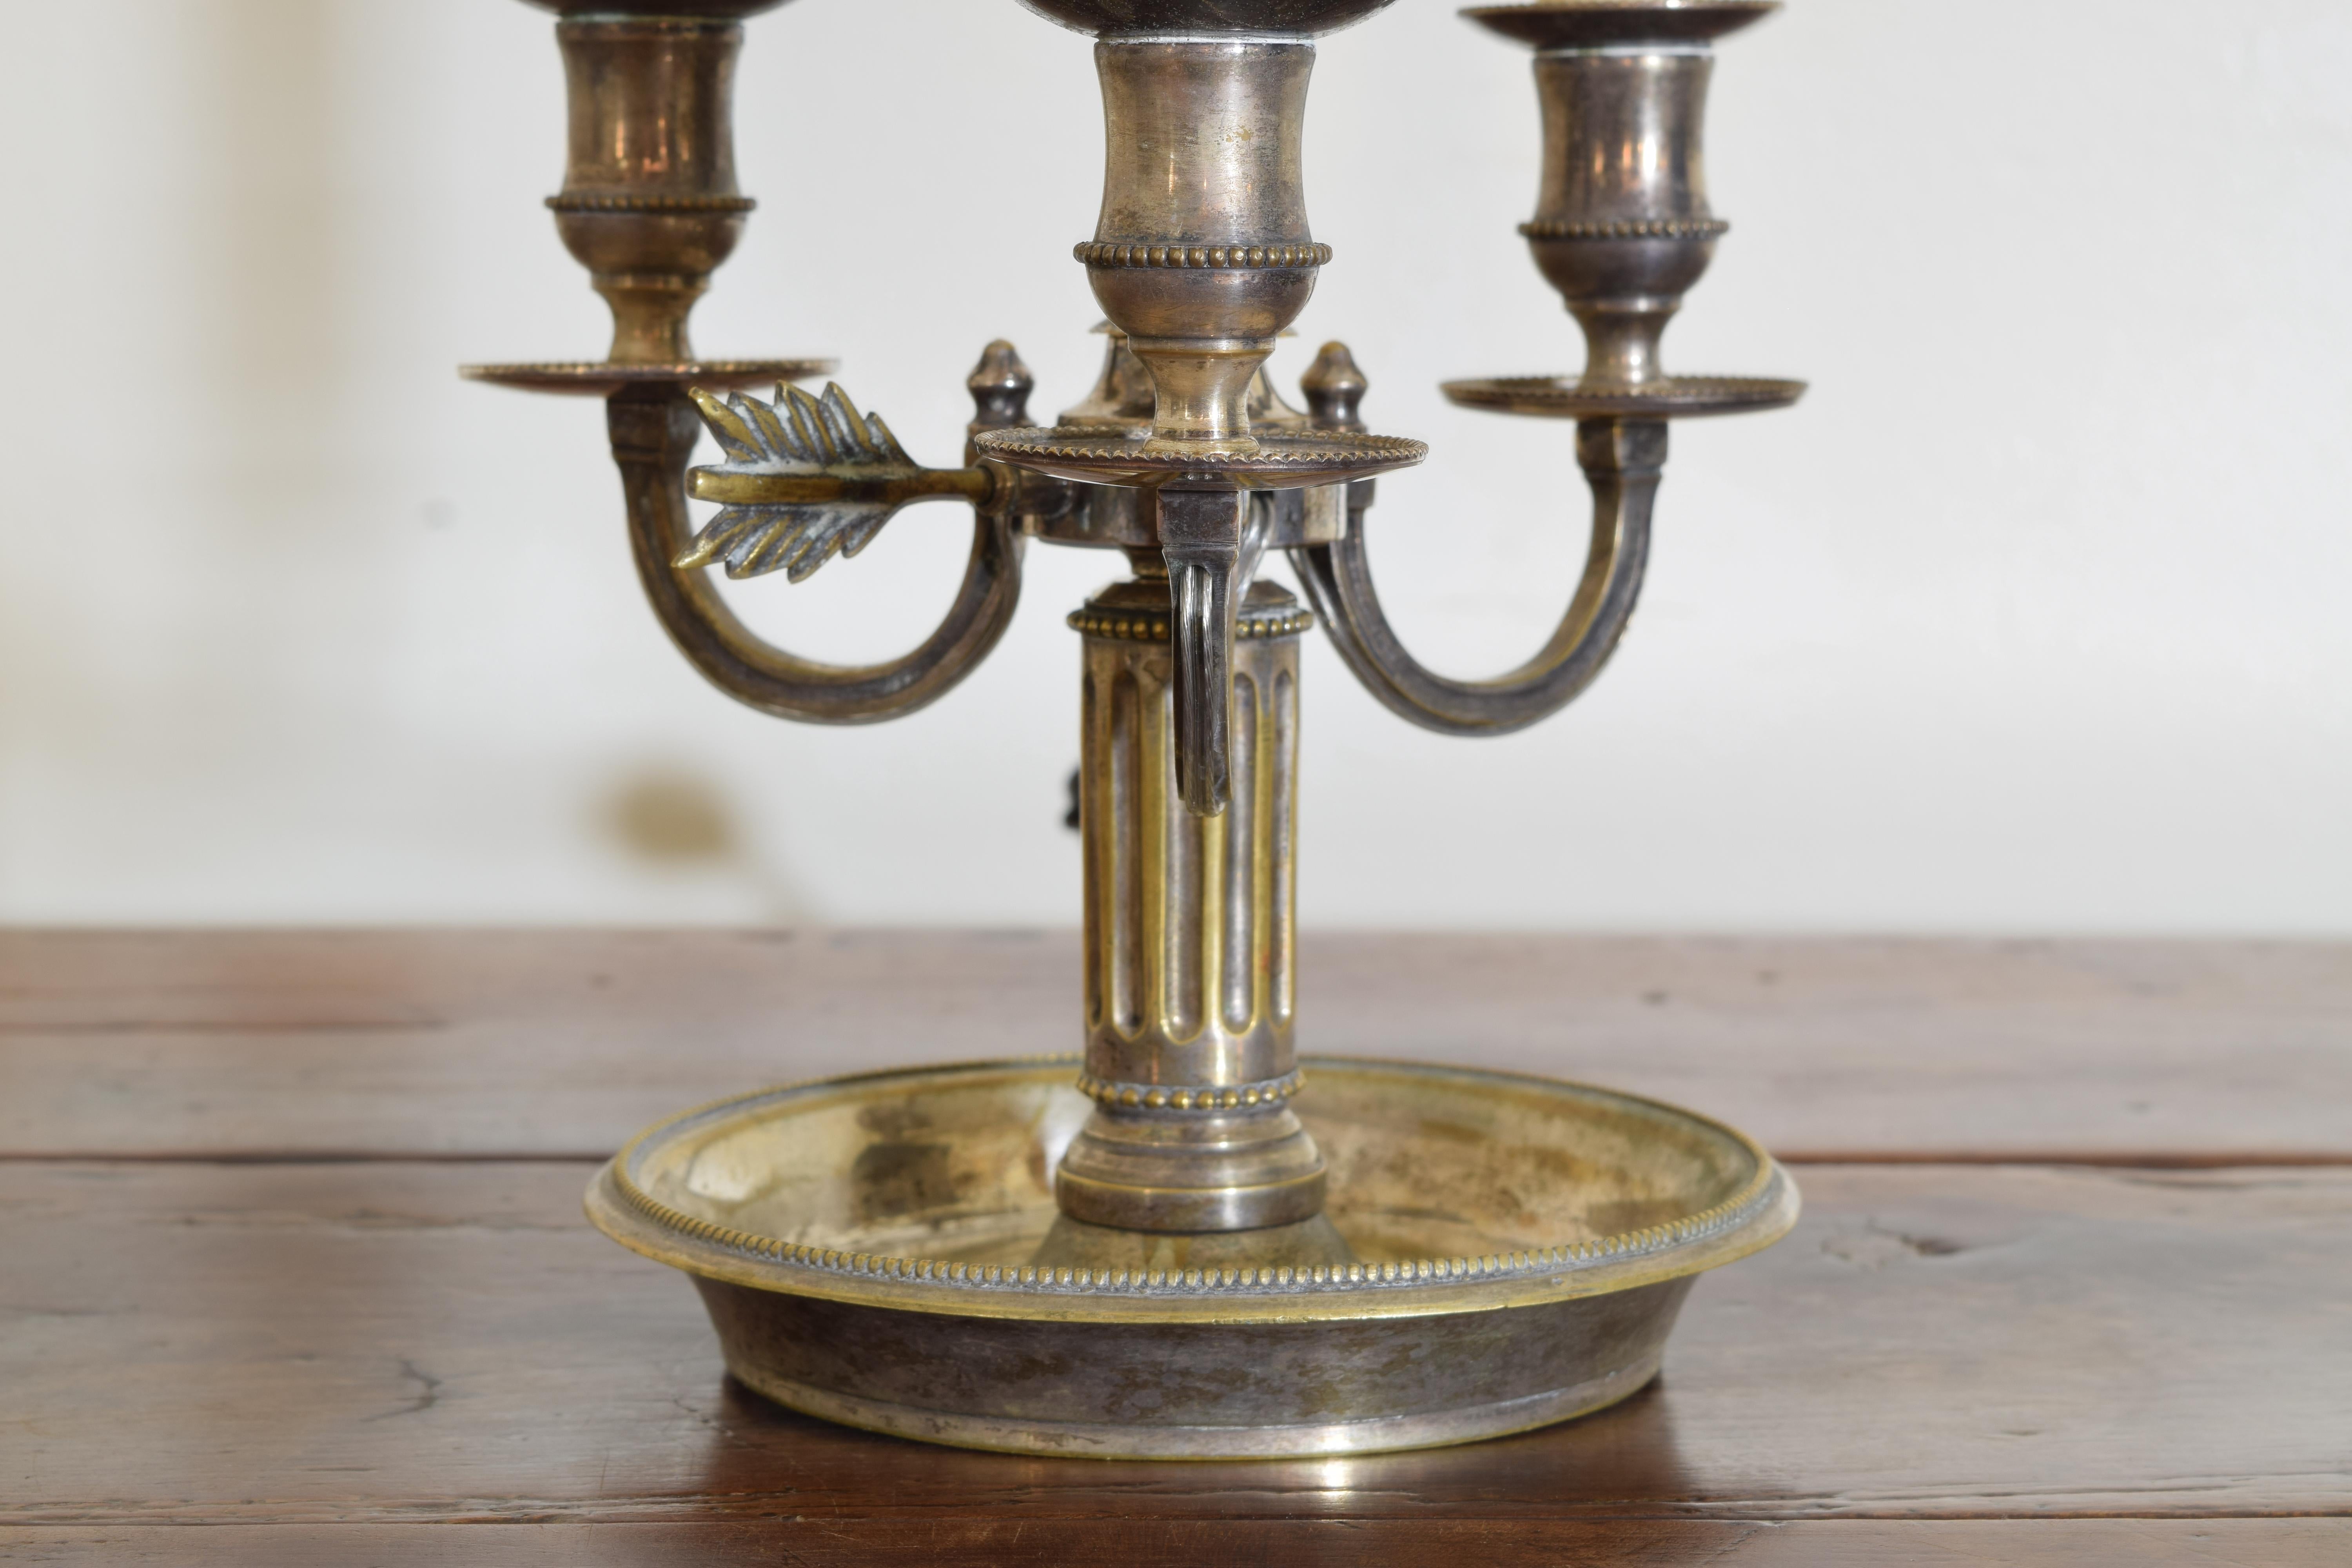 French Neoclassic Silver Plate 3-Light Bouillotte Lamp, 18th/19th cen. For Sale 2